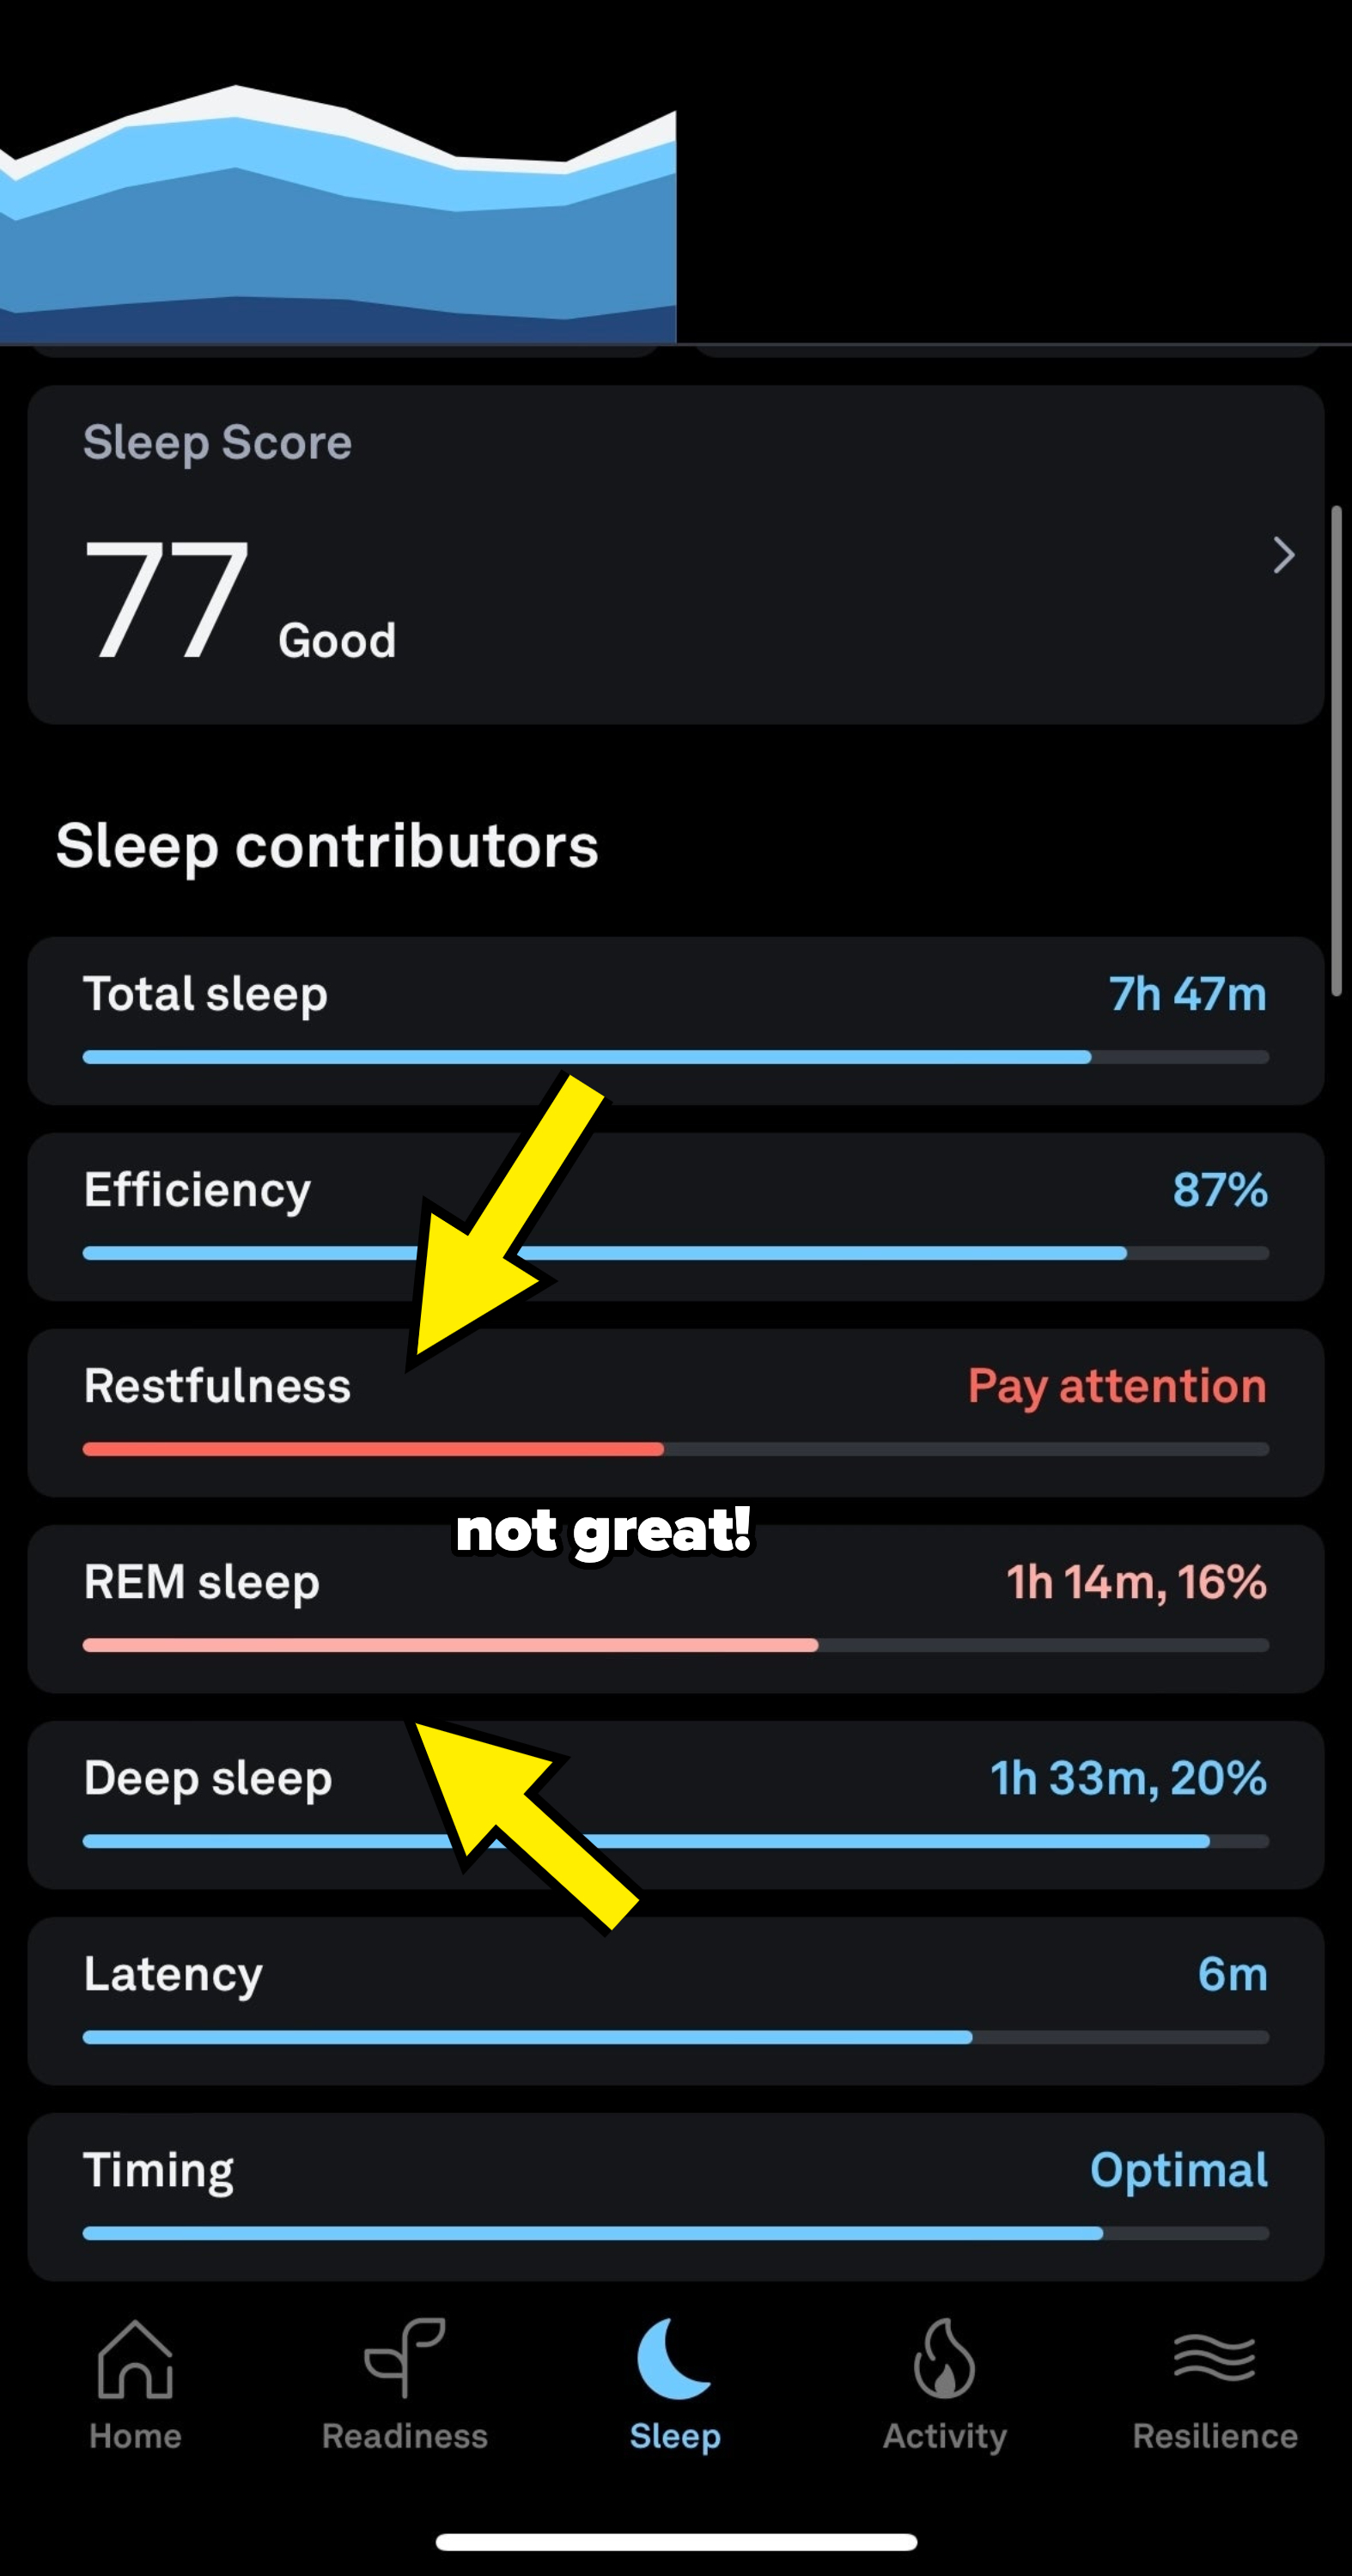 Sleep tracking app screen showing Sleep Score as &#x27;Good&#x27; at 77, with detailed sleep stage breakdown and timing